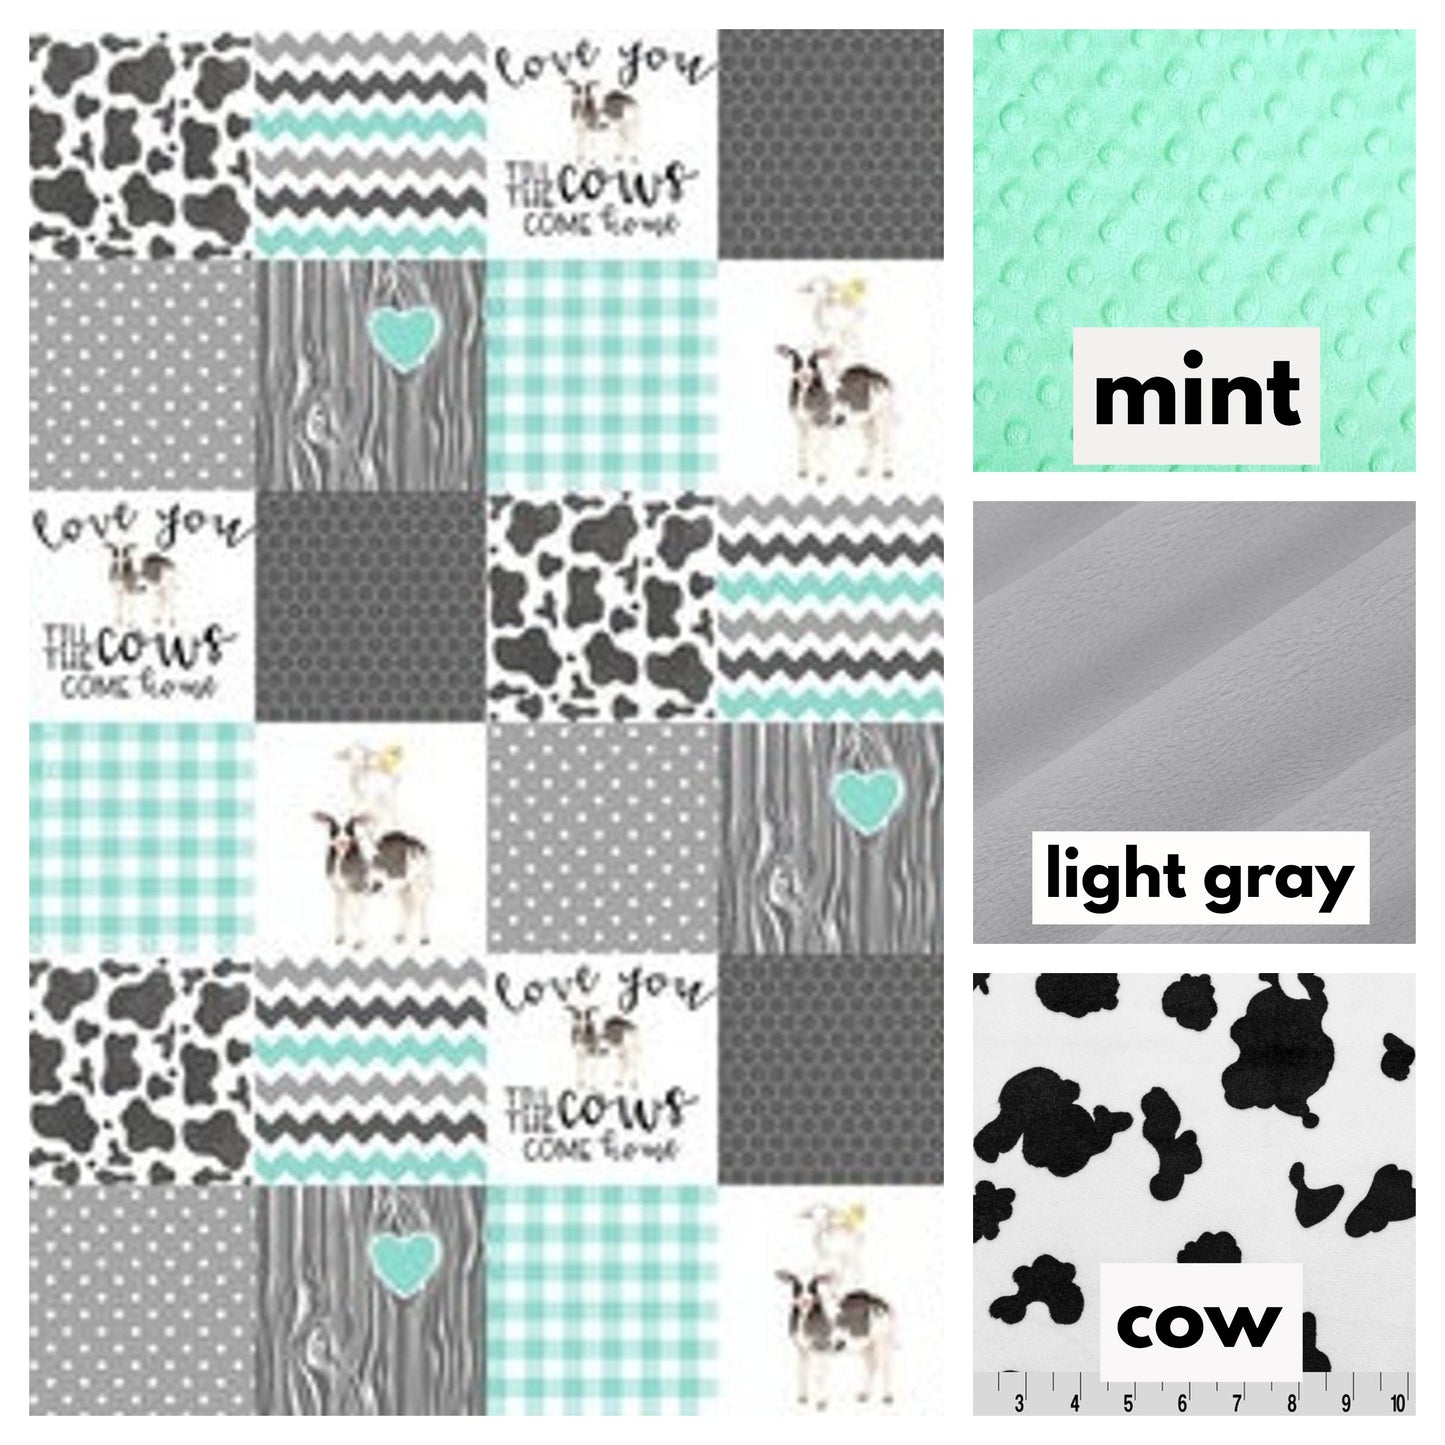 minky colors available - mint, light gray & cow